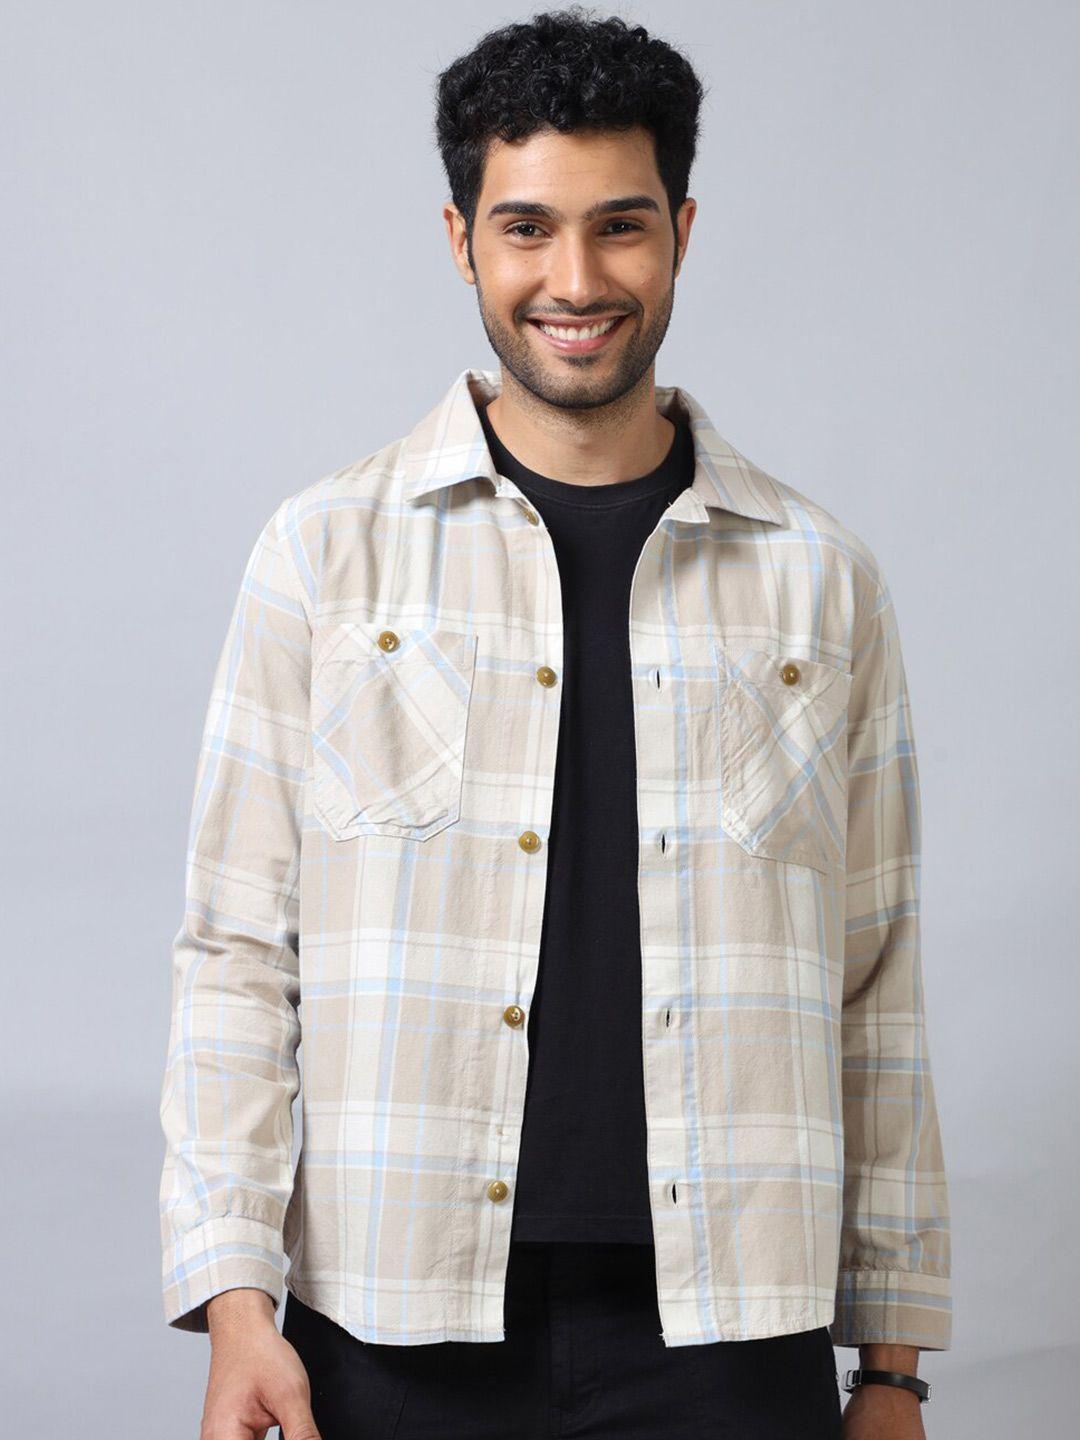 bushirt spread collar long sleeves comfort opaque checked party shirt